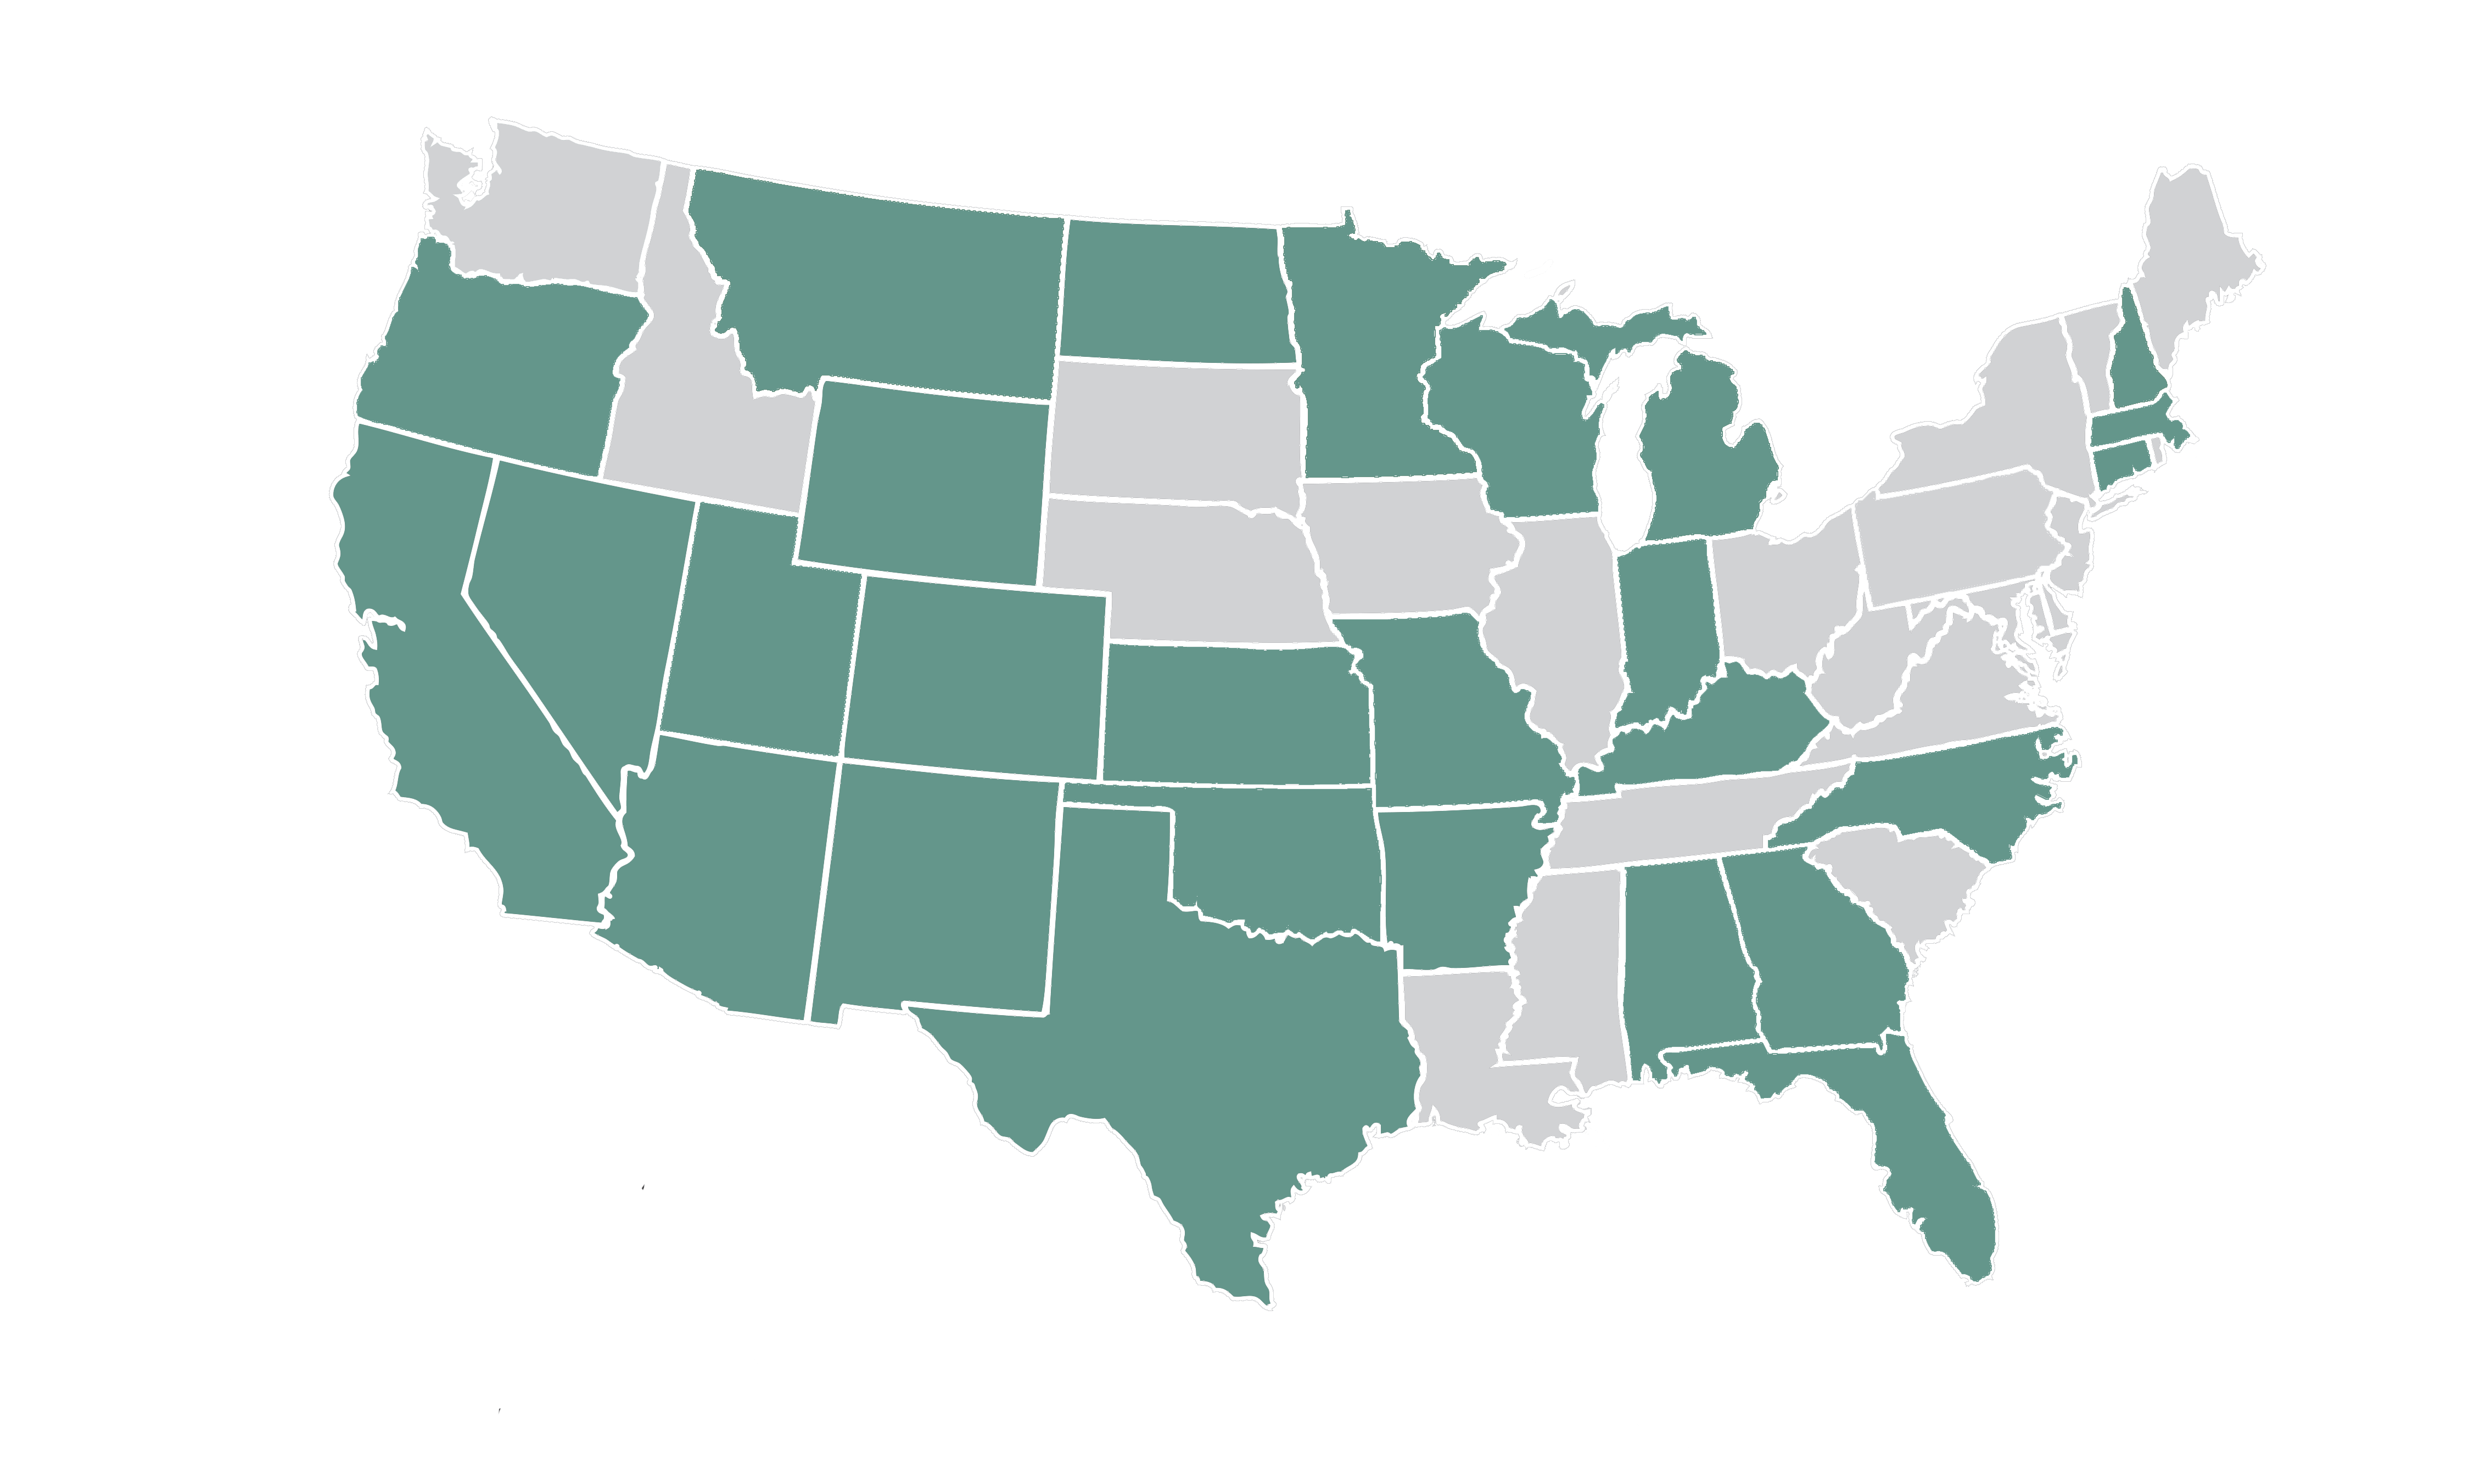 Map of US with states that have Argus' locations shaded